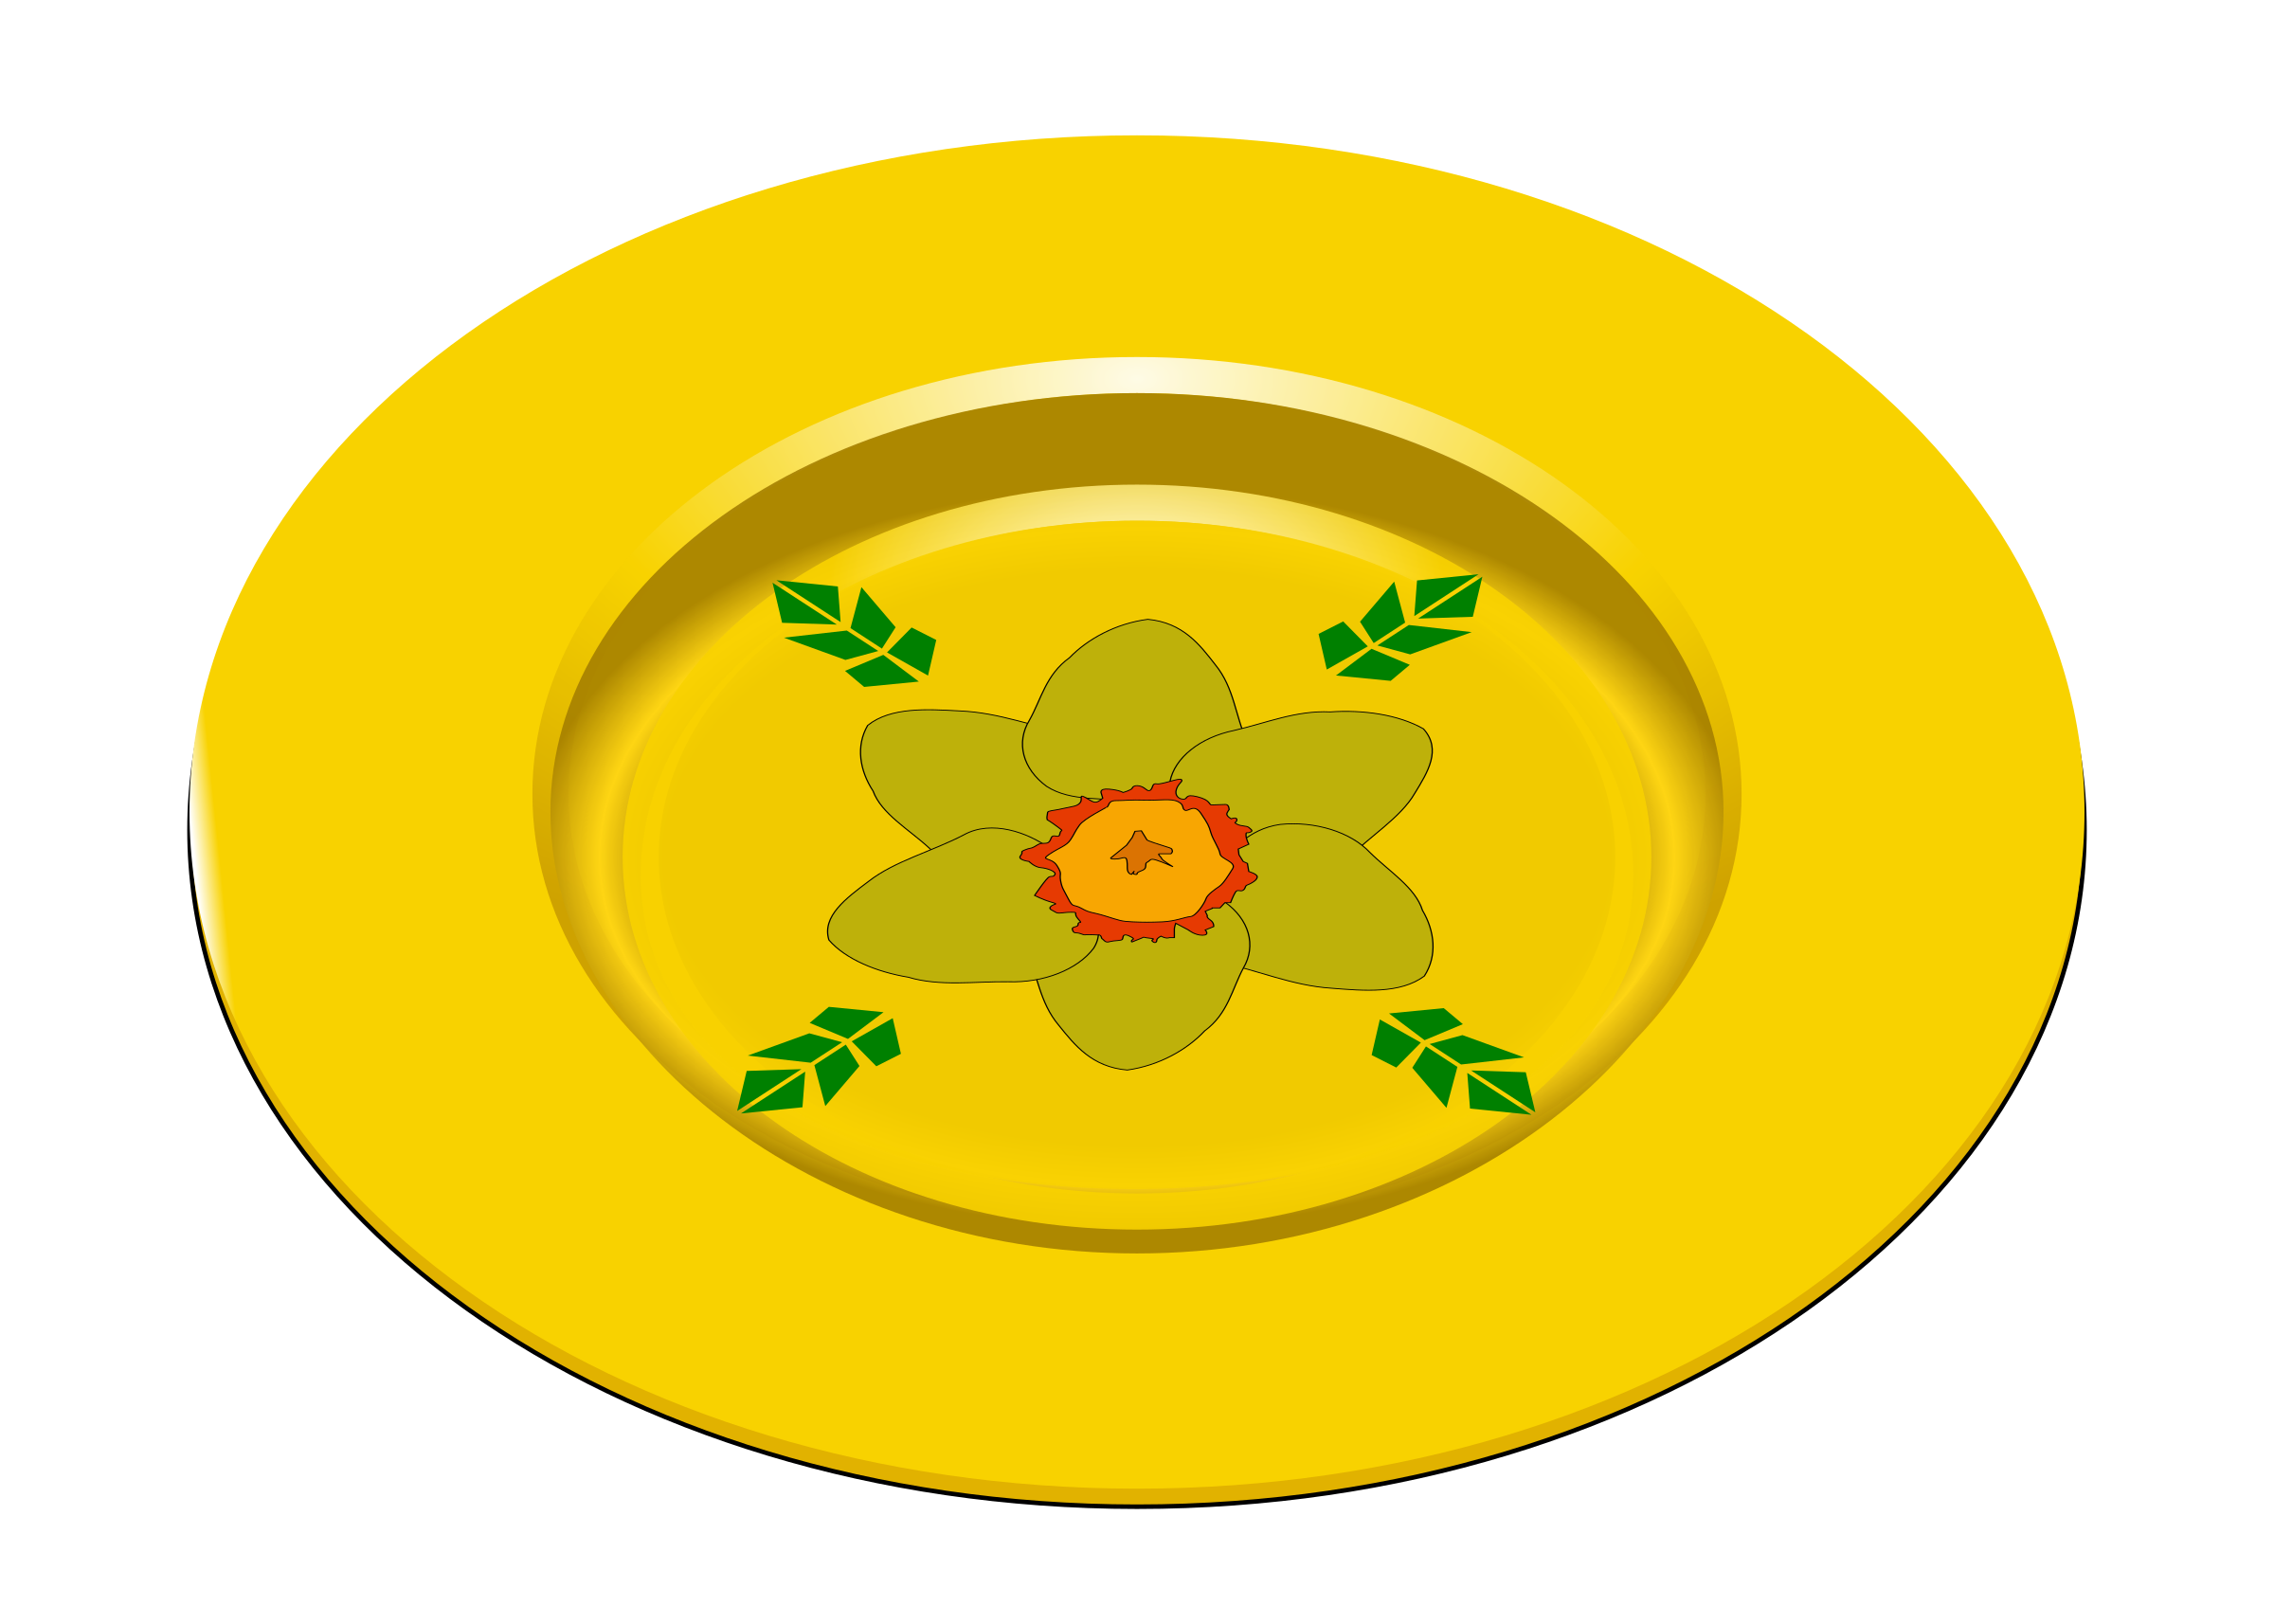 plate clipart yellow plate